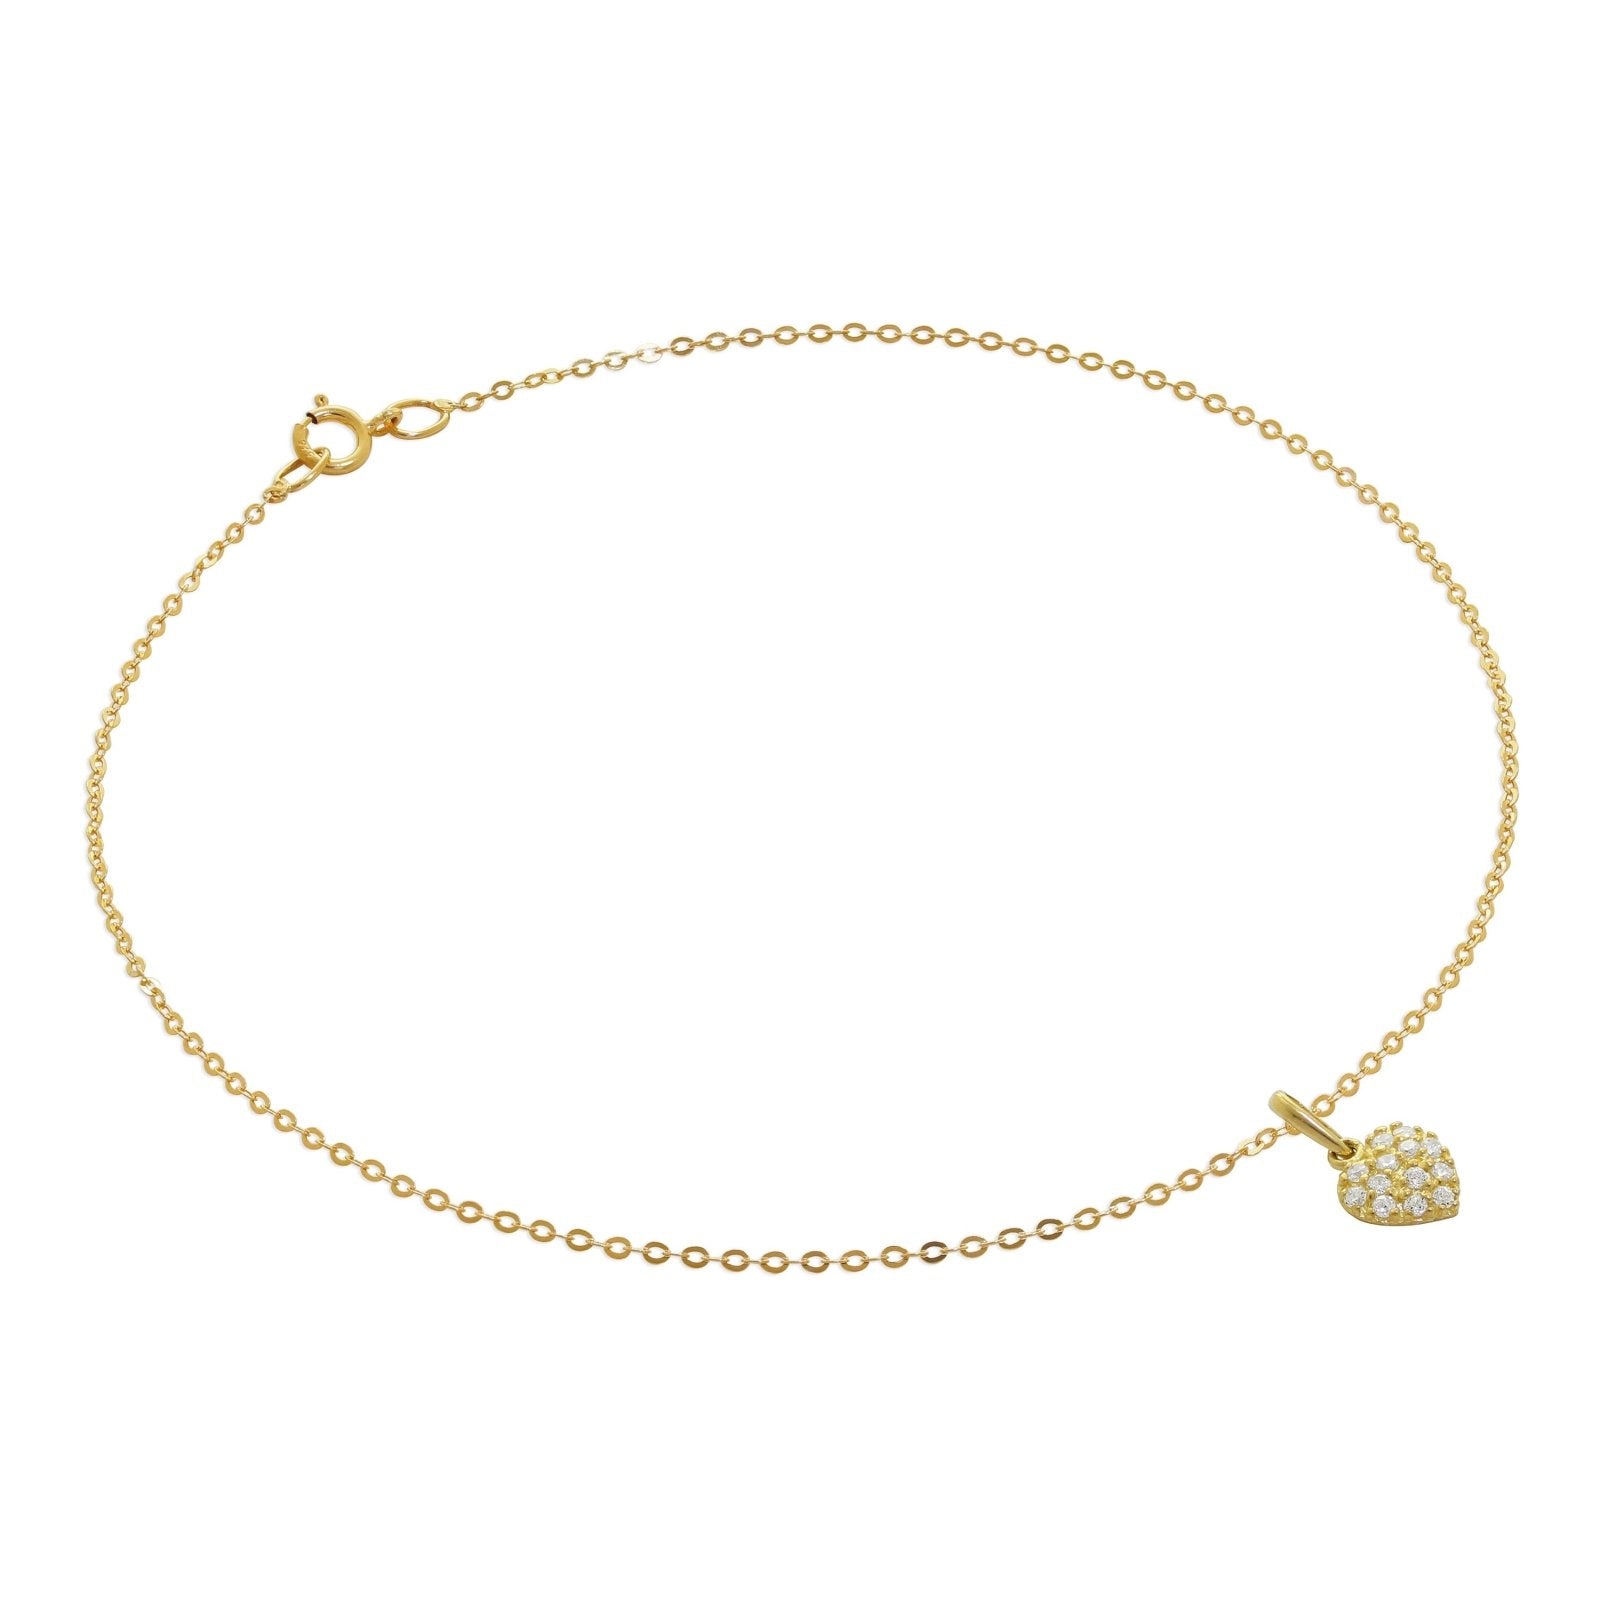 9ct Gold Hammered Trace Anklet with Flat CZ Heart Charm - 9.5 Inches - jewellerybox